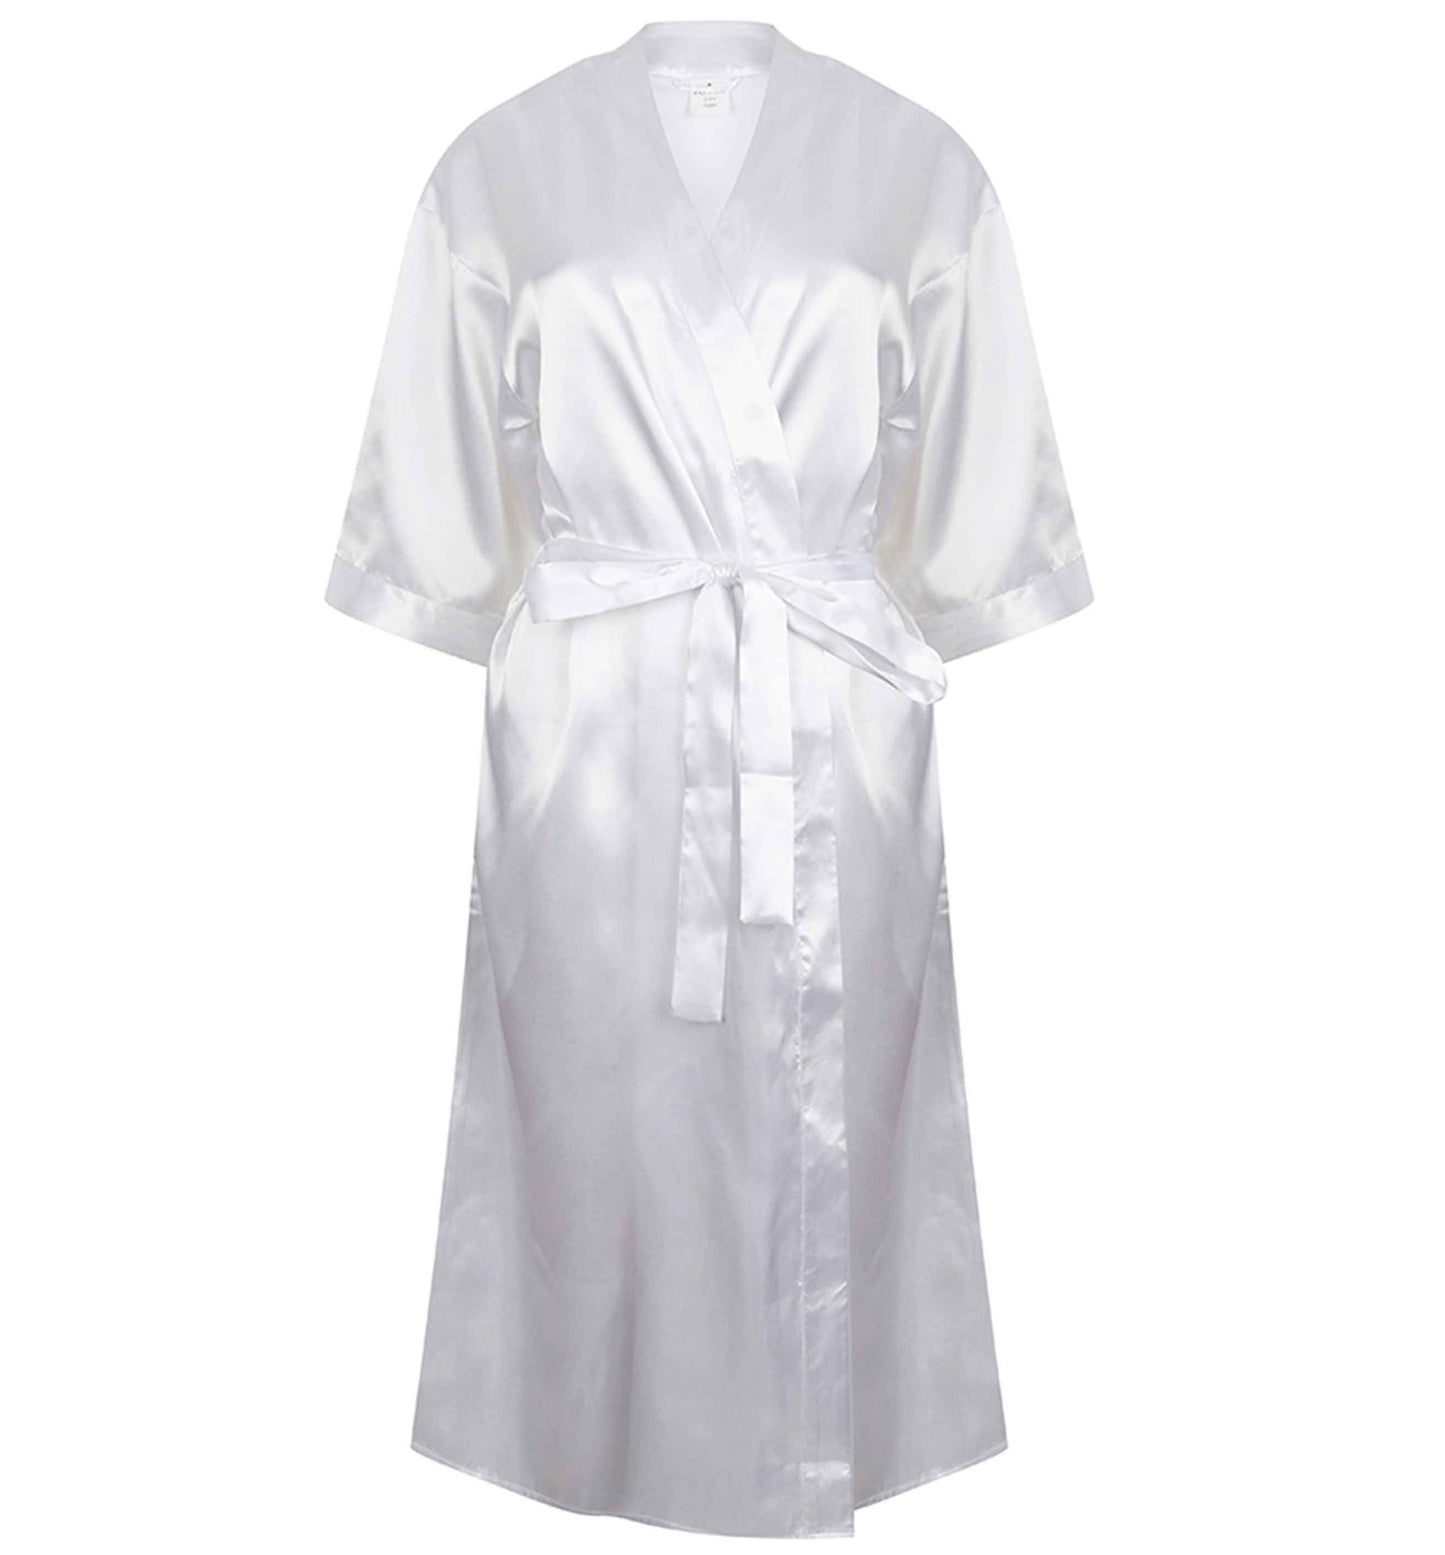 Happy Mother's day love from the bump - blue | 8-18 | Kimono style satin robe | Ladies dressing gown